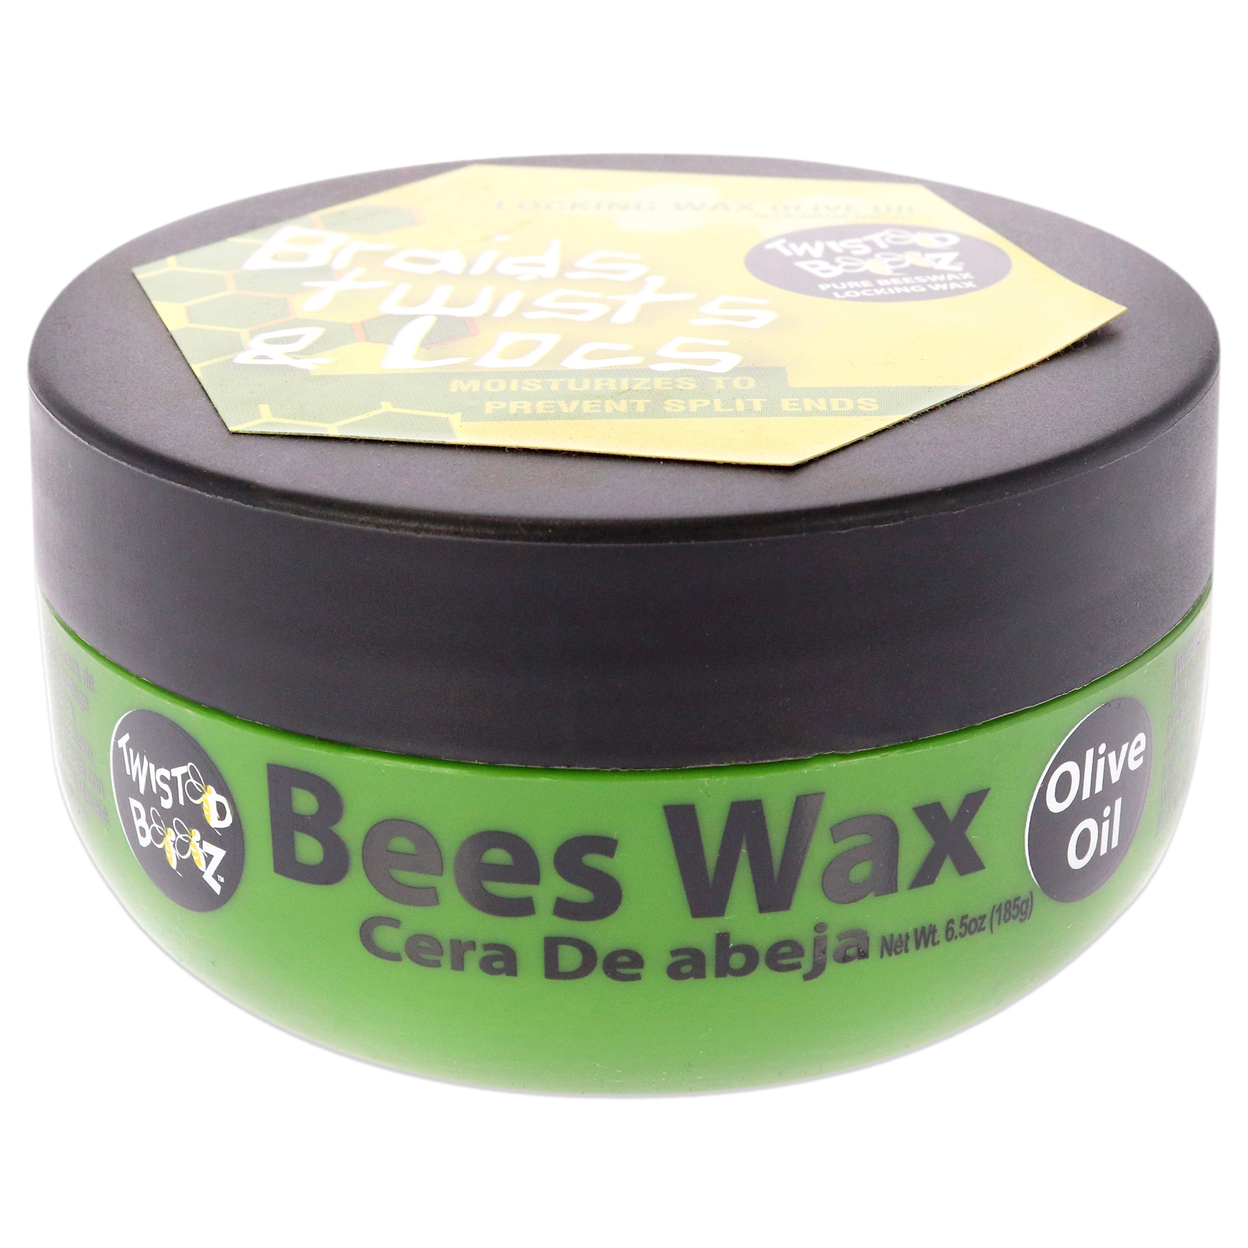 Ecoco Twisted Bees Wax - Olive Oil 6.5 Oz